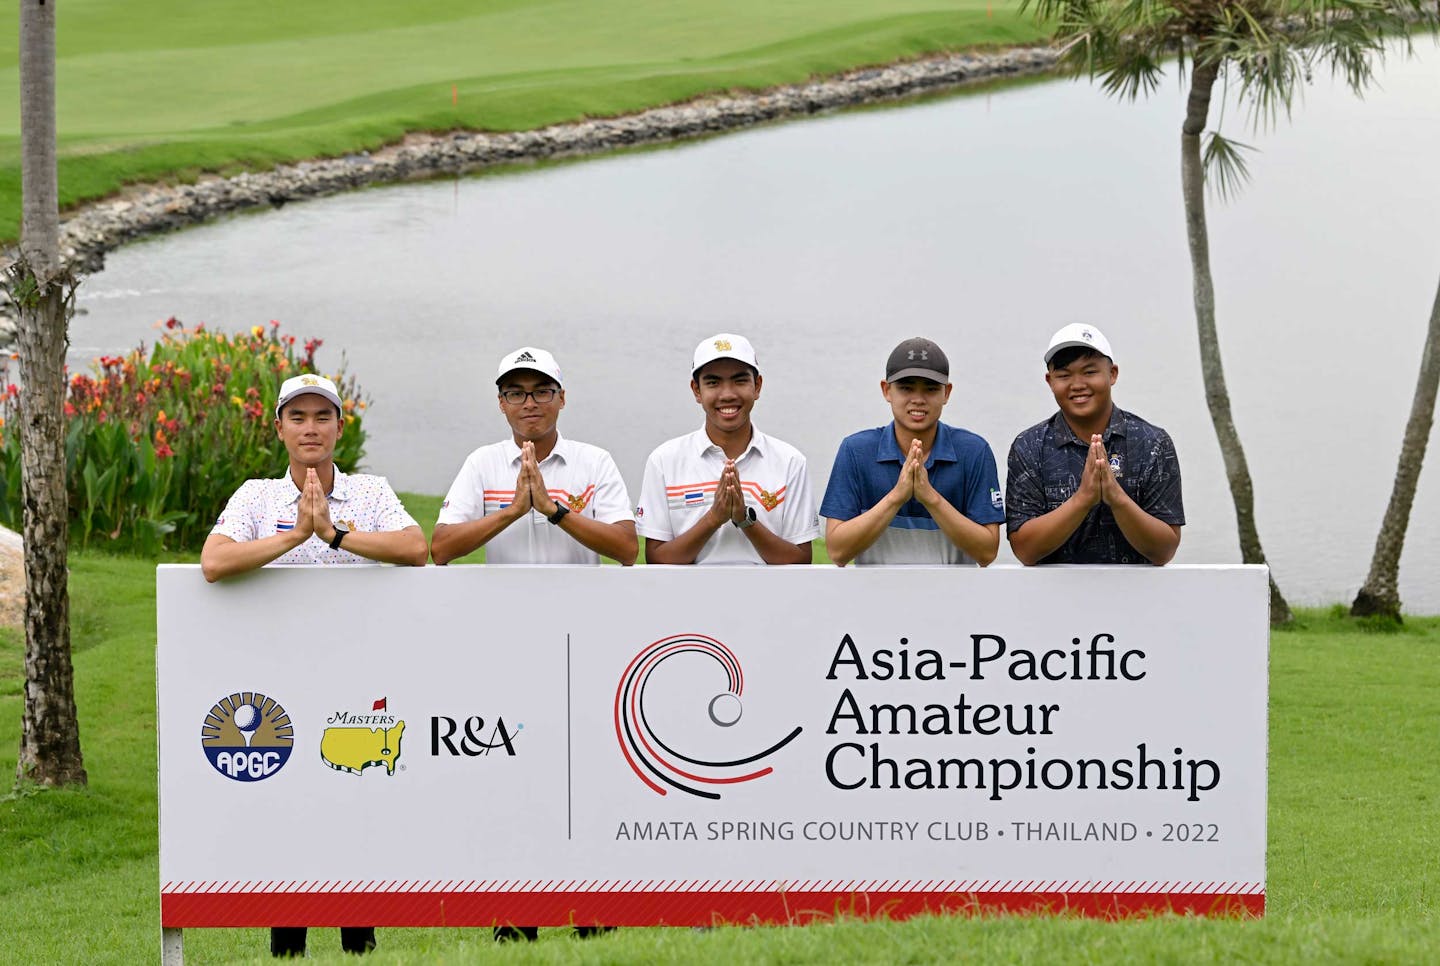 The Asia-Pacific Amateur Championship will be staged October 27-30, 2022 at Amata Spring Country Club, Chon Buri, Thailand